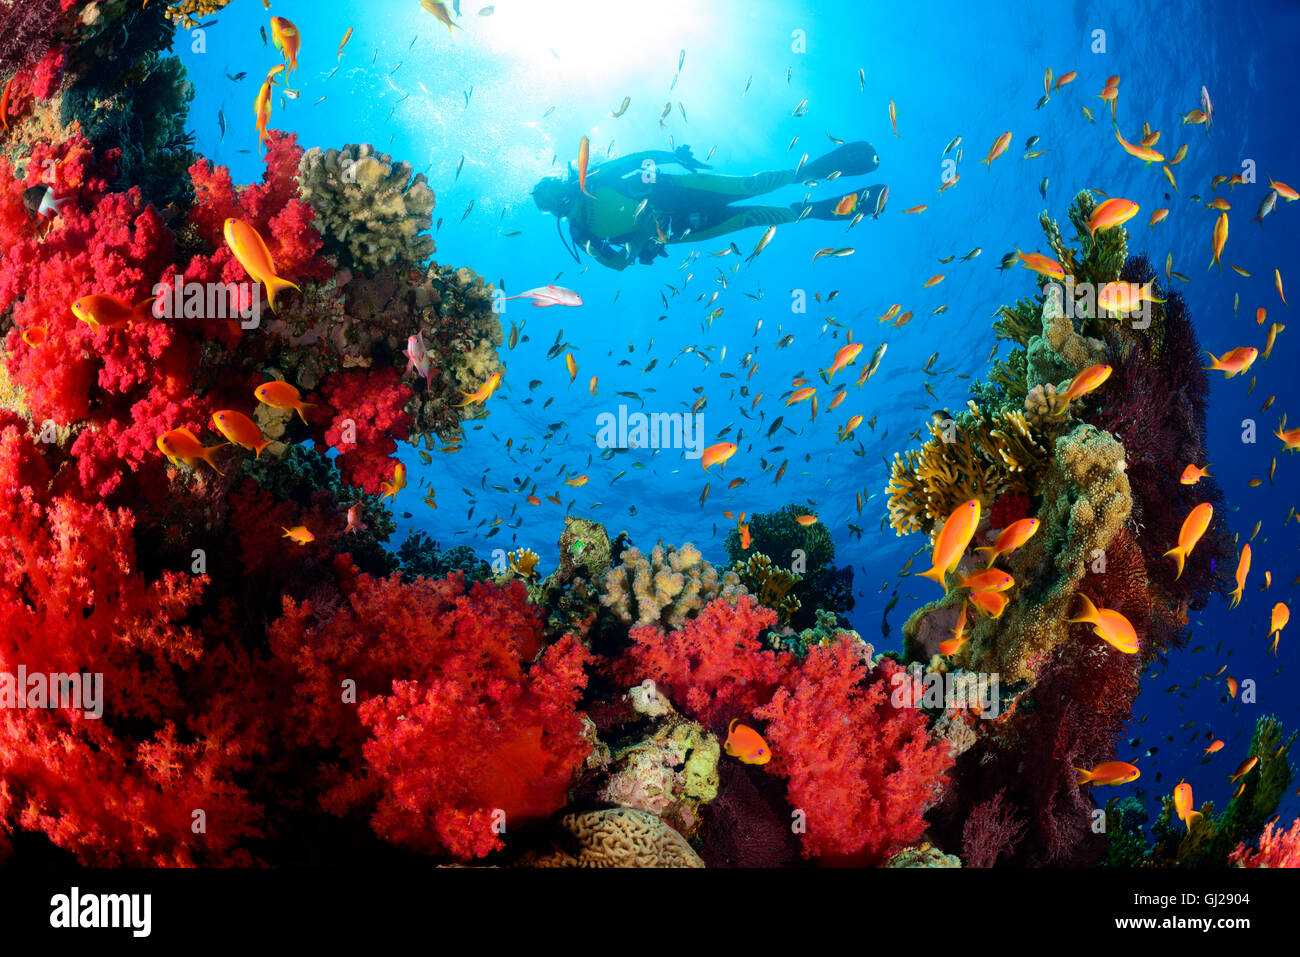 Coral reef, Hemprichs Red Soft Tree Coral, Orange Basslet or Sea Goldie and scuba diver, Wadi Gimal Marsa Alam, Red Sea, Egypt Stock Photo